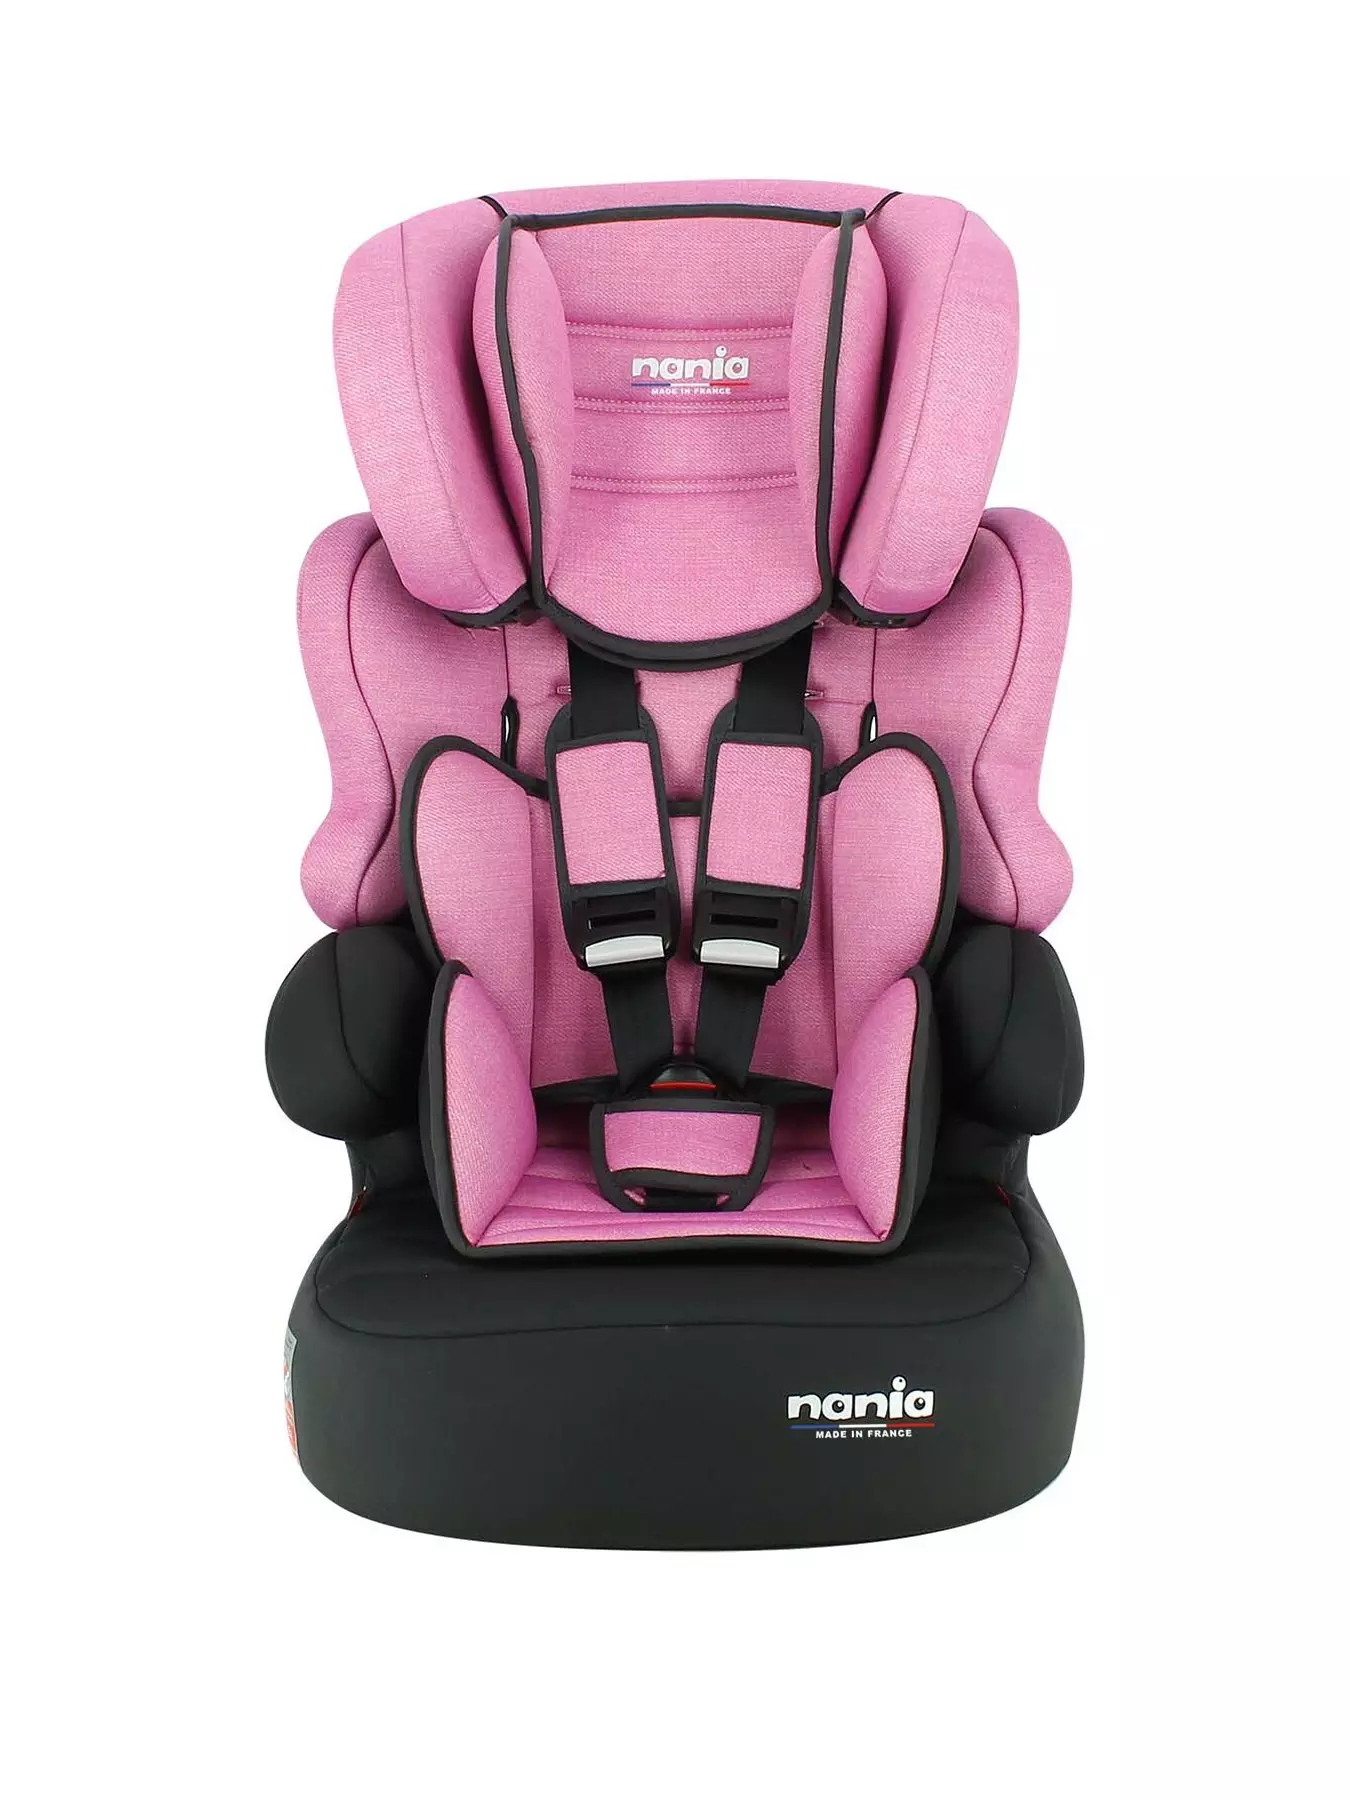 9 36kgs Not I Size Compliant Car Seats Child Baby Very Ireland